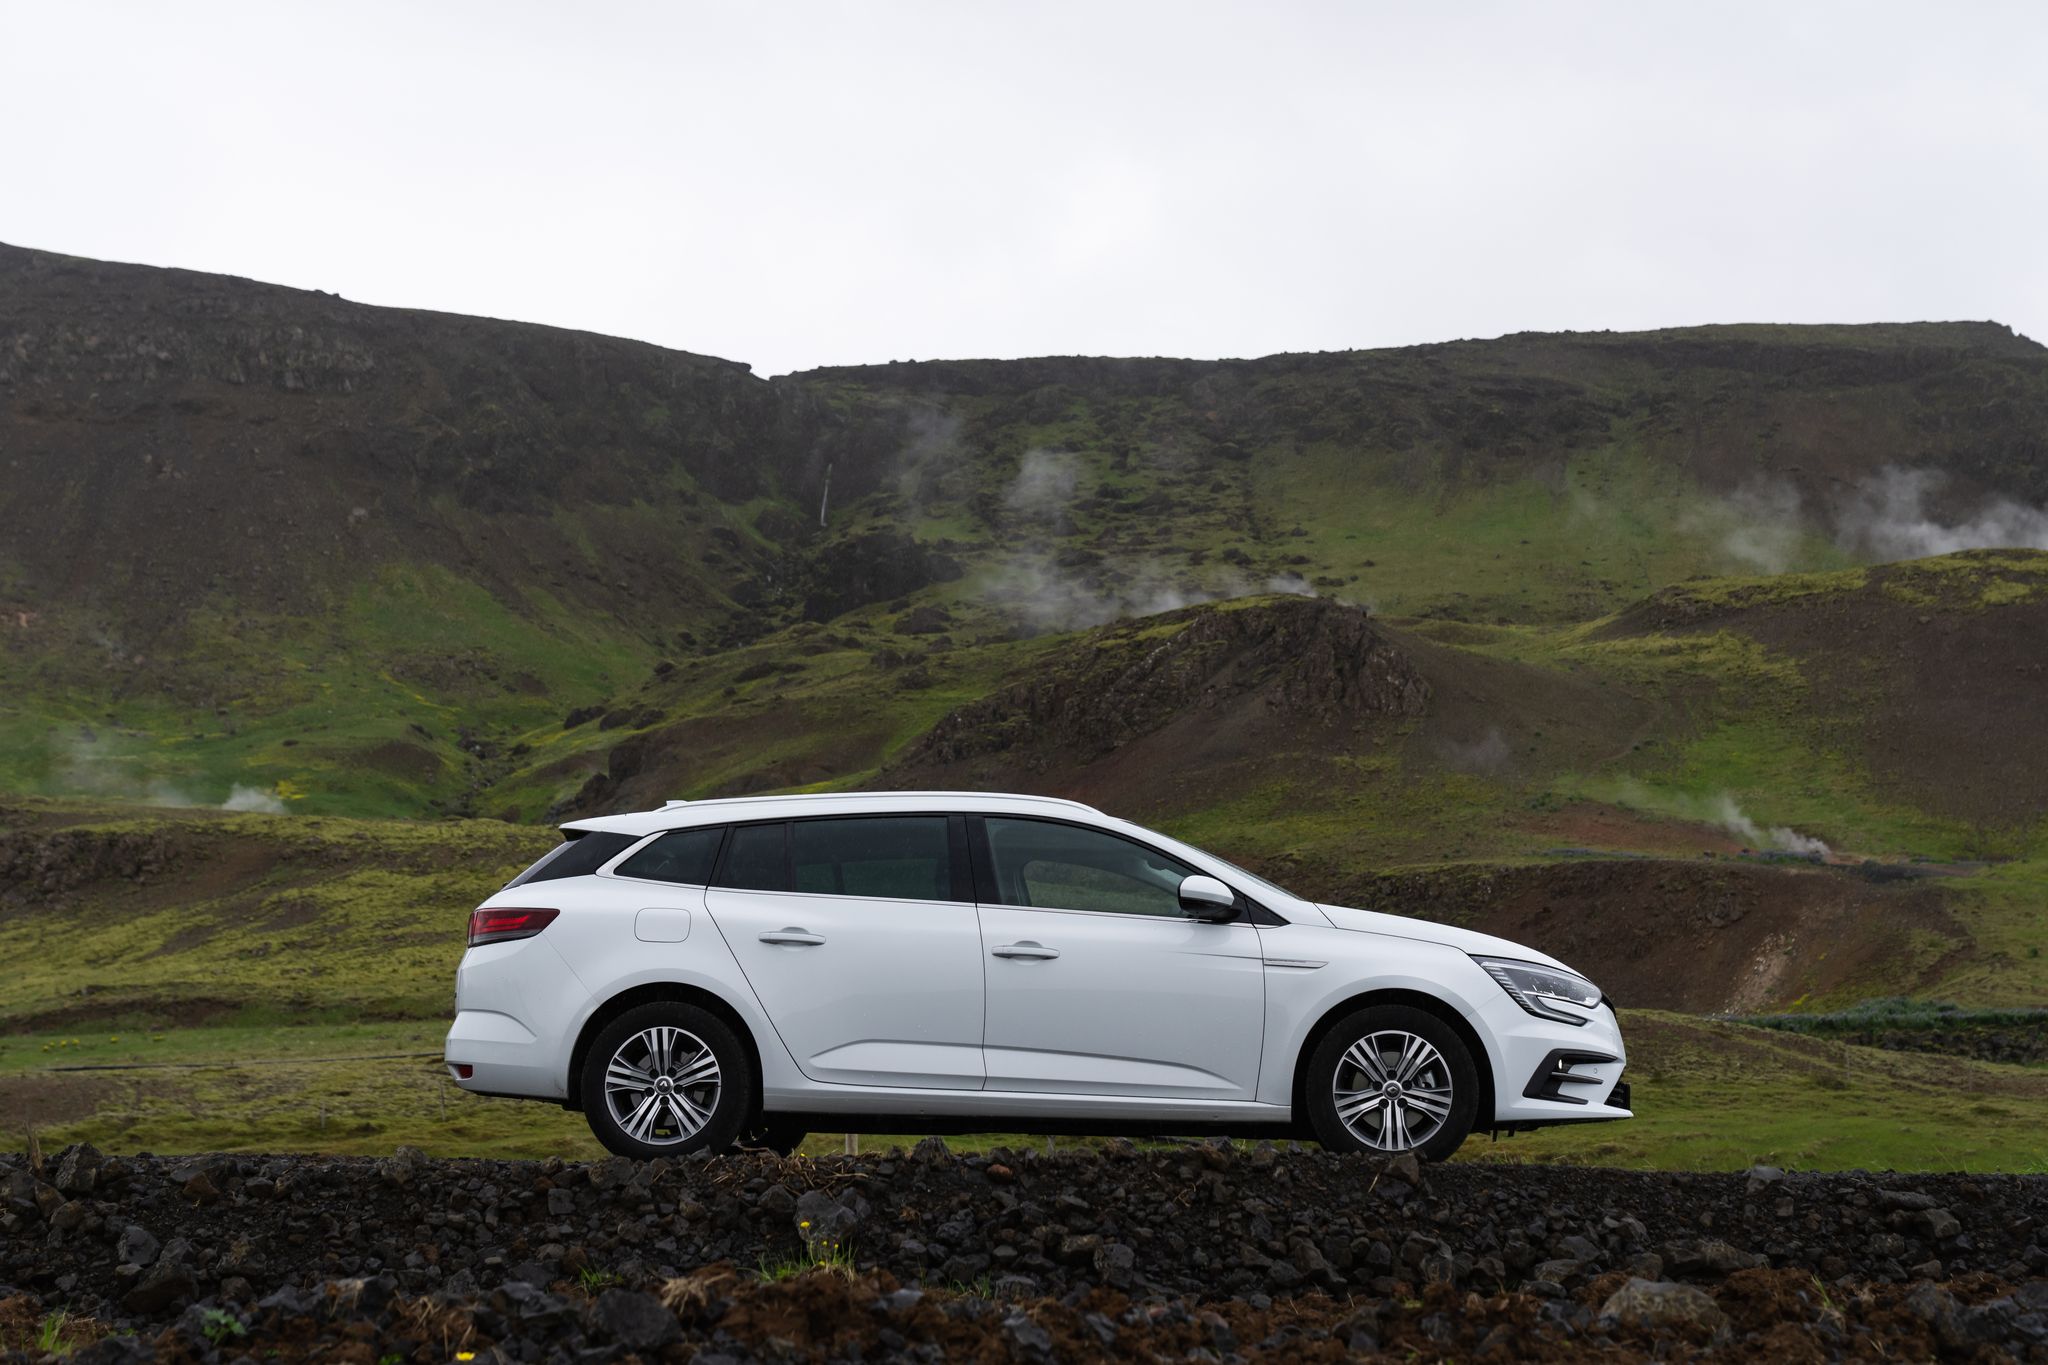 The spacious and comfortable Renault Megane rental car from Go Car Rental in Iceland